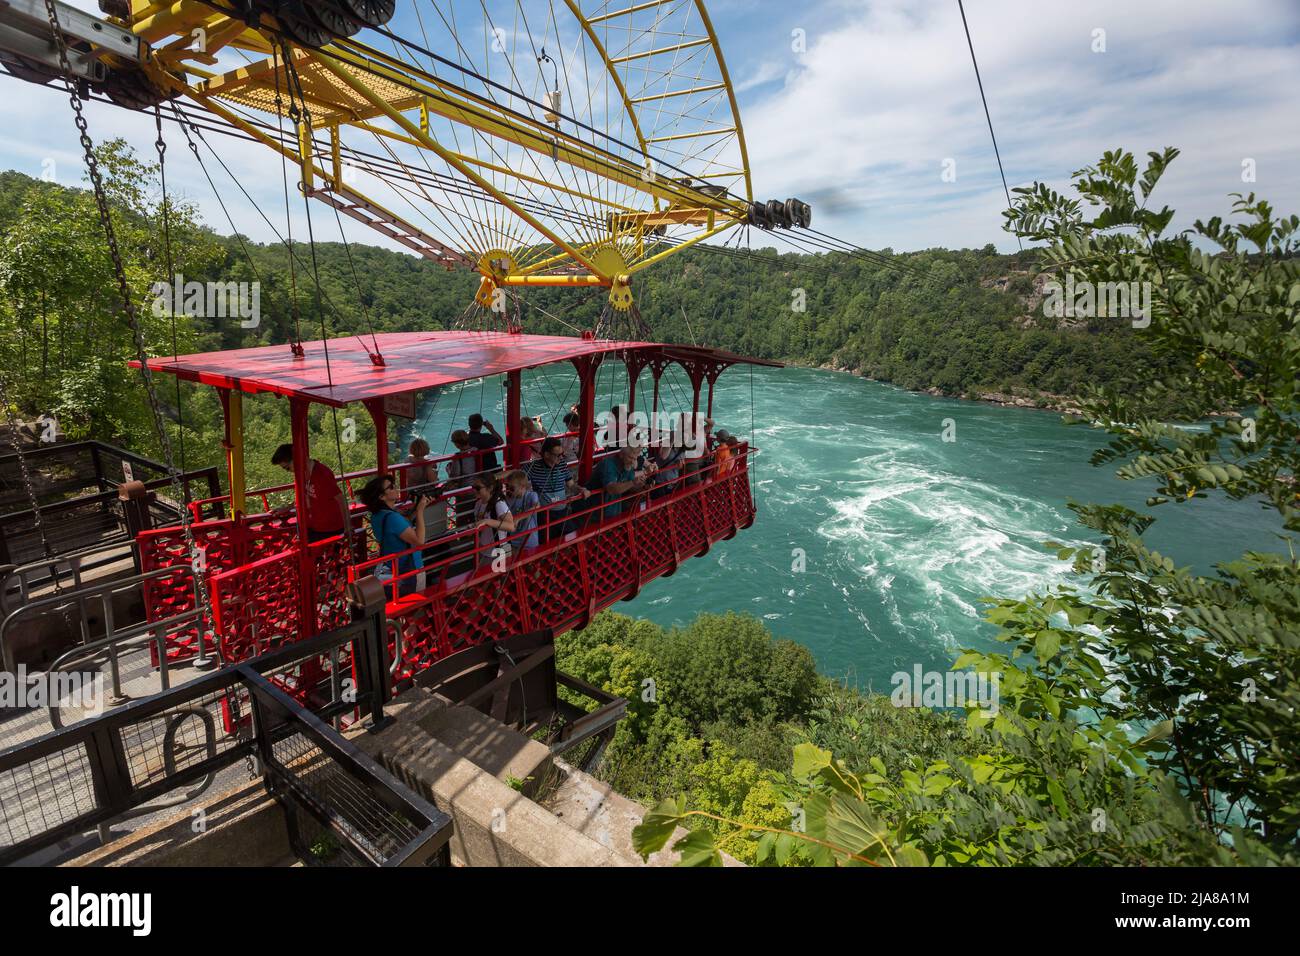 The Whirlpool Aero Car taking tourists and visitors for a ride over the whirlpool of the Niagara River. Niagara Falls, Ontario, Canada - AUG 2019 Stock Photo